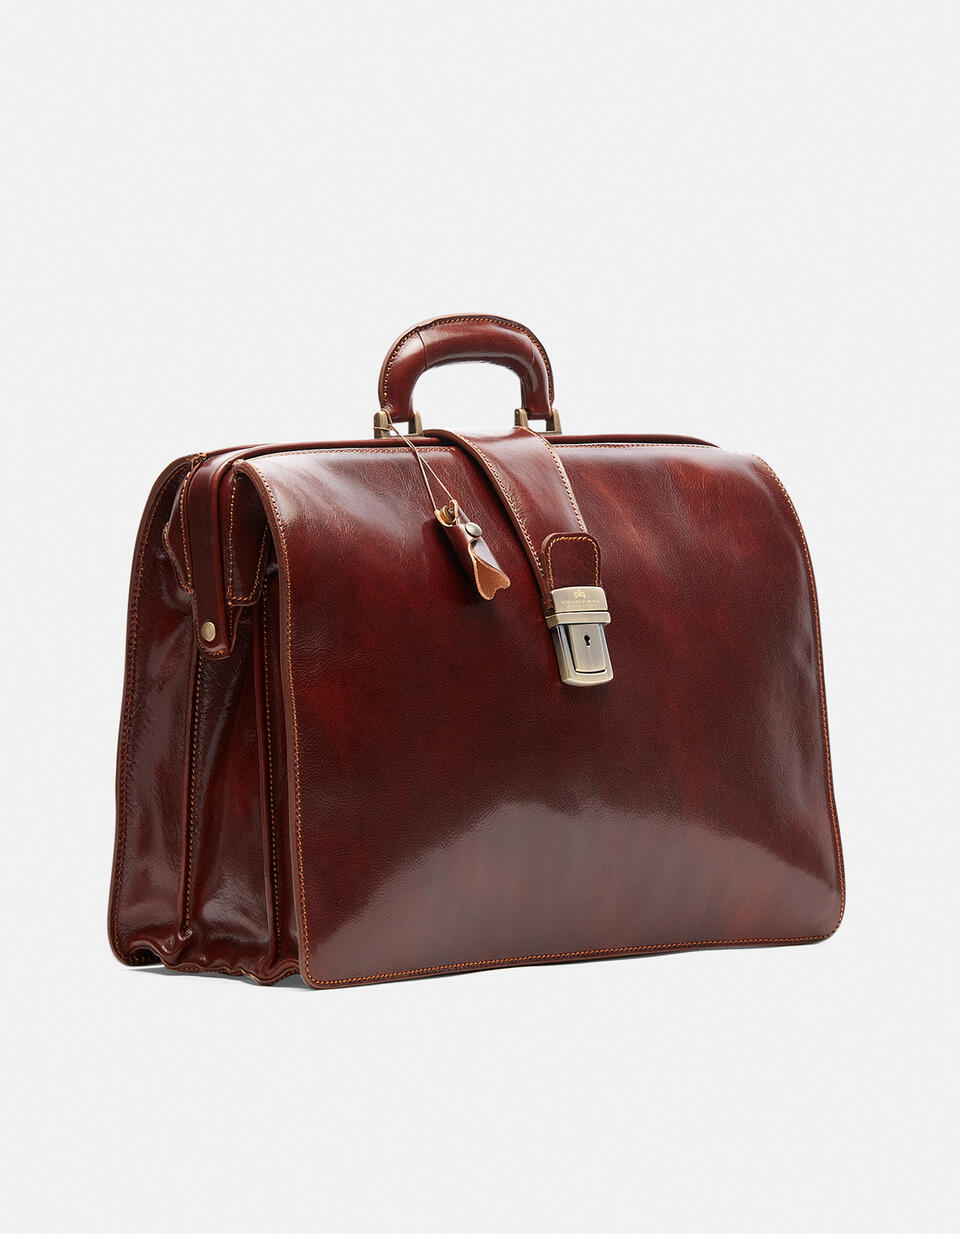 Large classic doctor's bag with unlined interior - Doctor Bags | Briefcases  - Doctor Bags | BriefcasesCuoieria Fiorentina